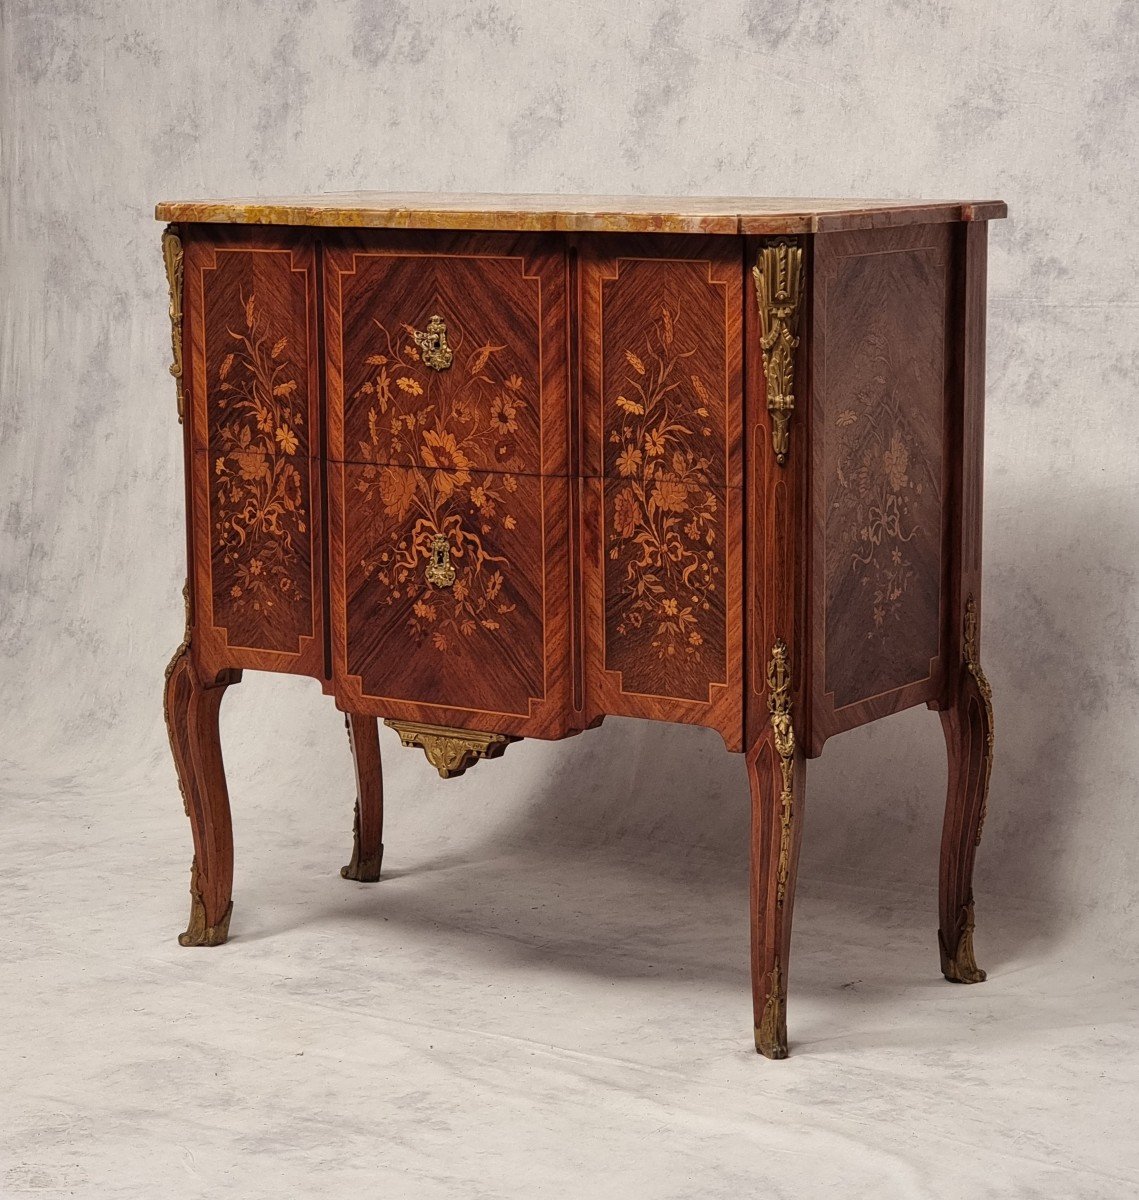 Transition Style Commode Napoleon III Period - Floral Marquetry - Rosewood - 19th-photo-8